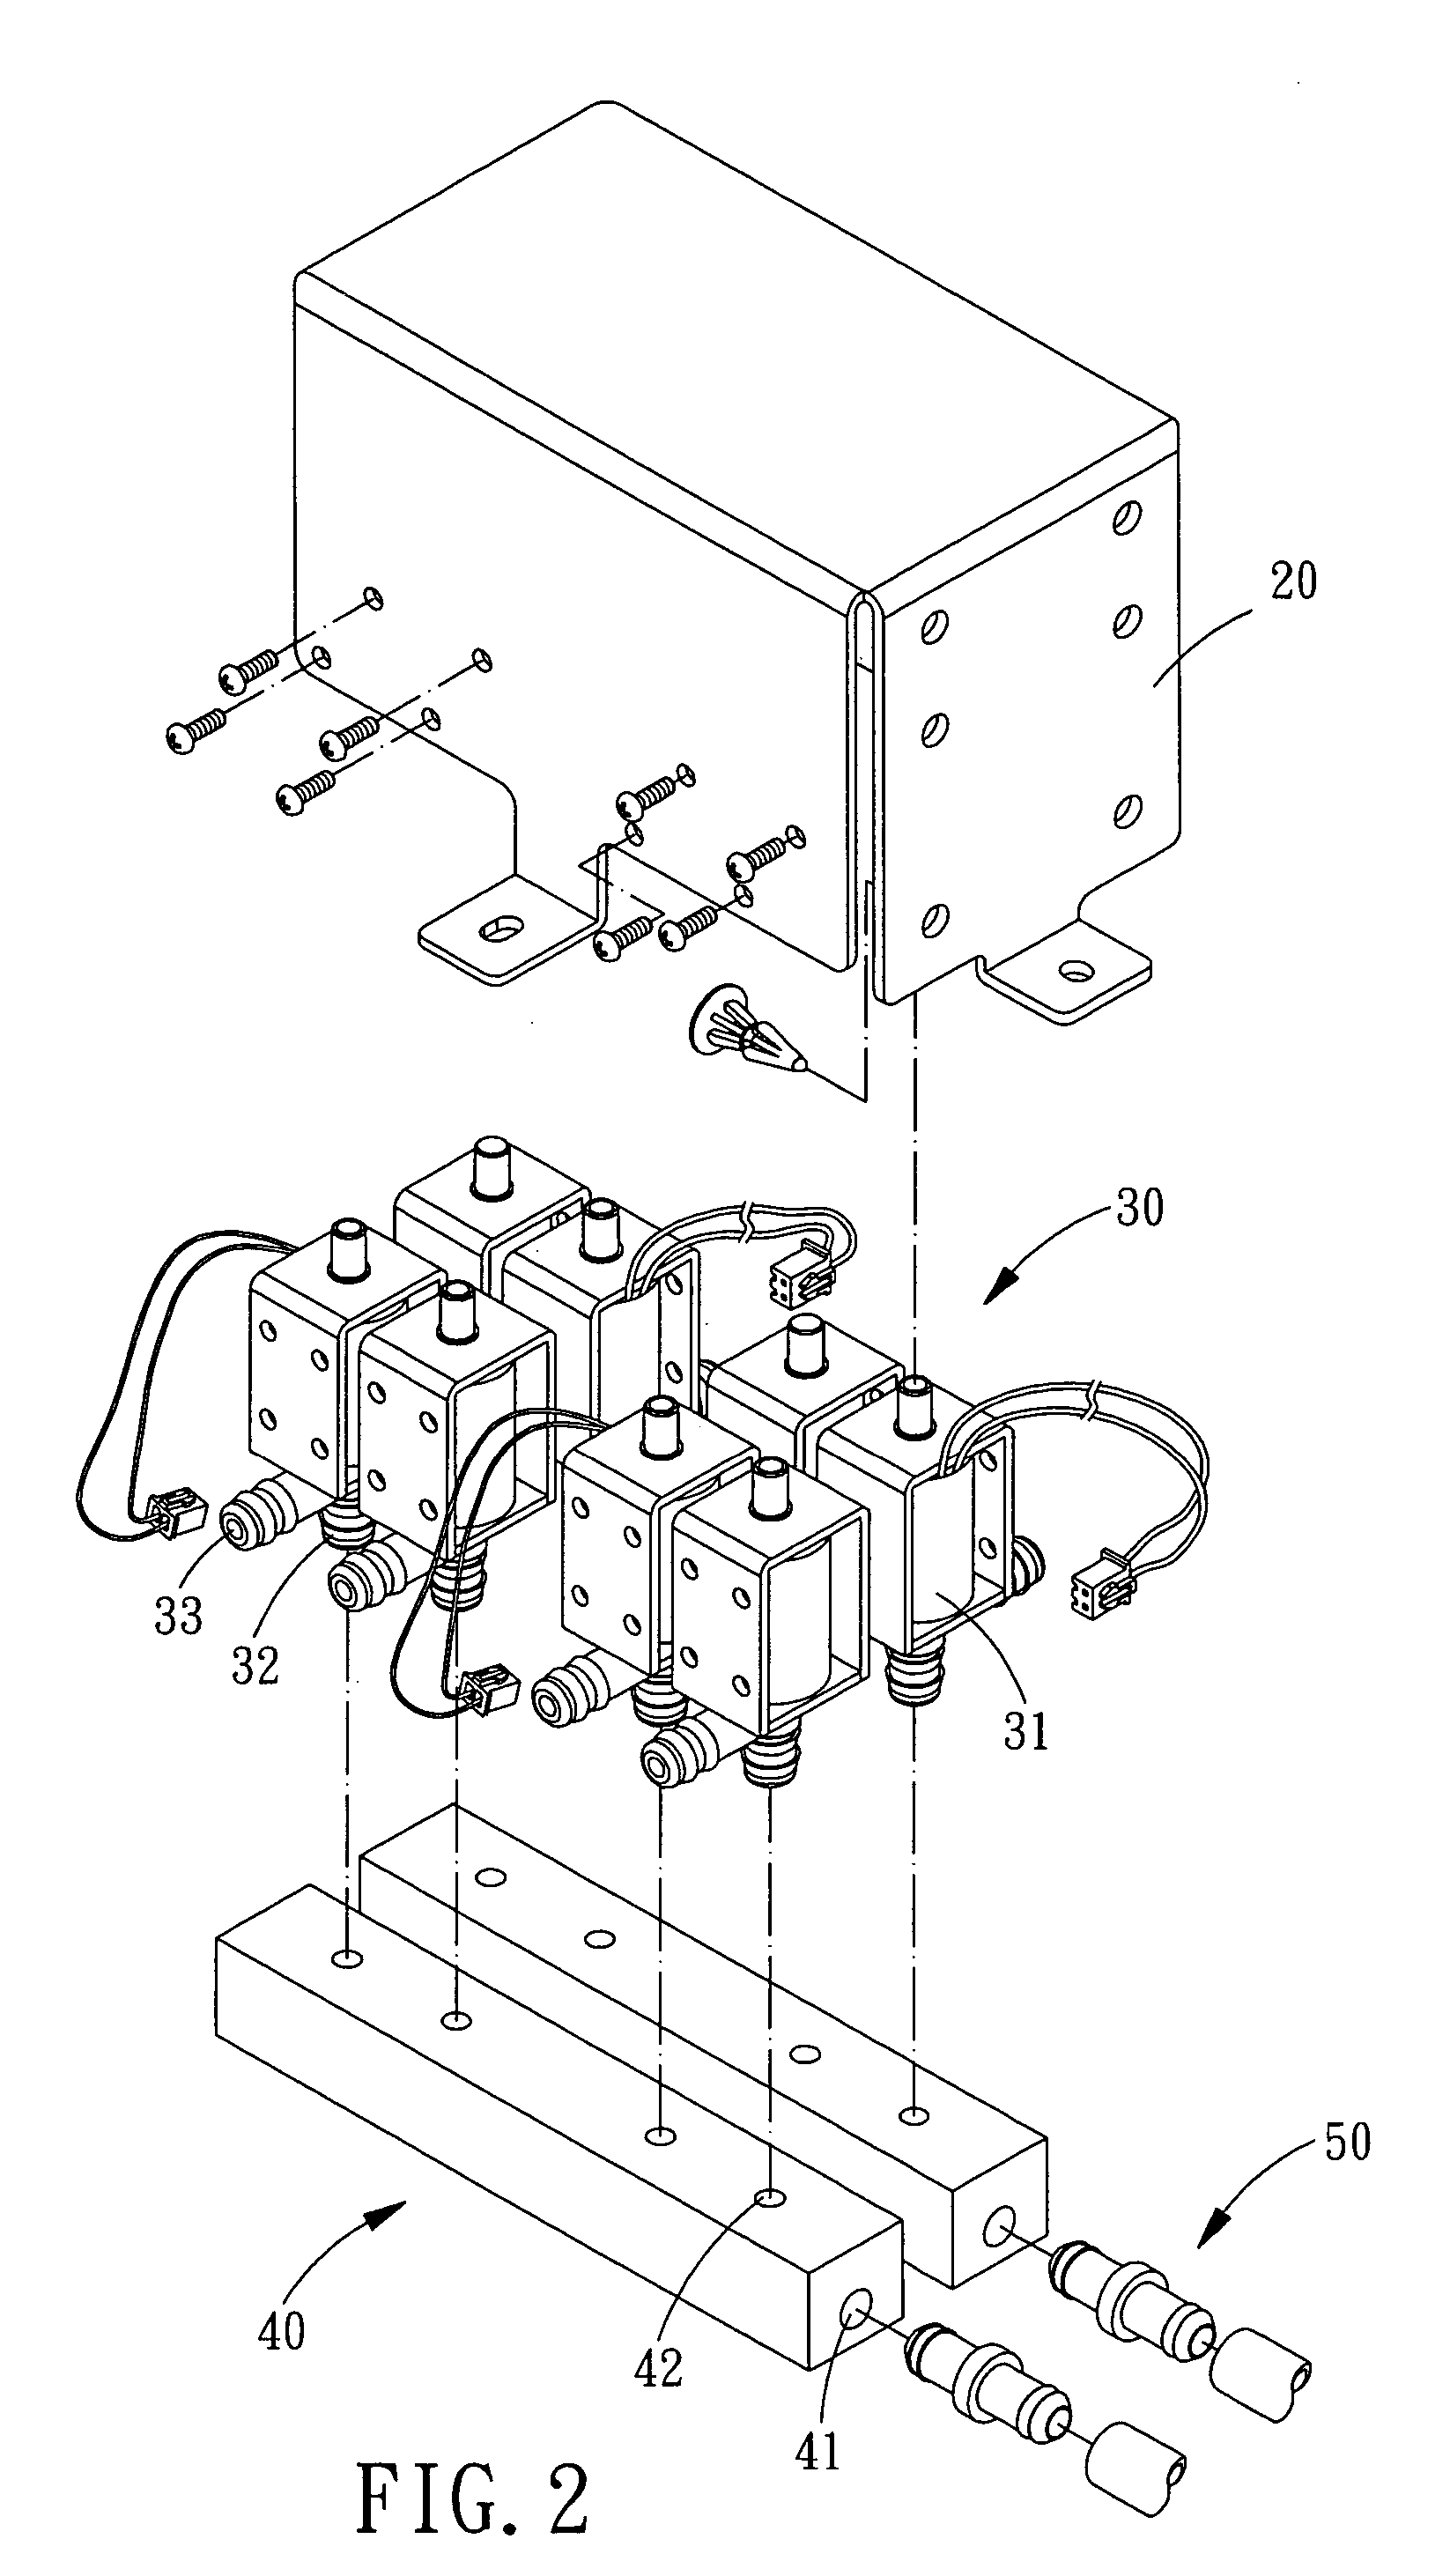 Air intake structure for electromagnetic valve assembly of a massage chair